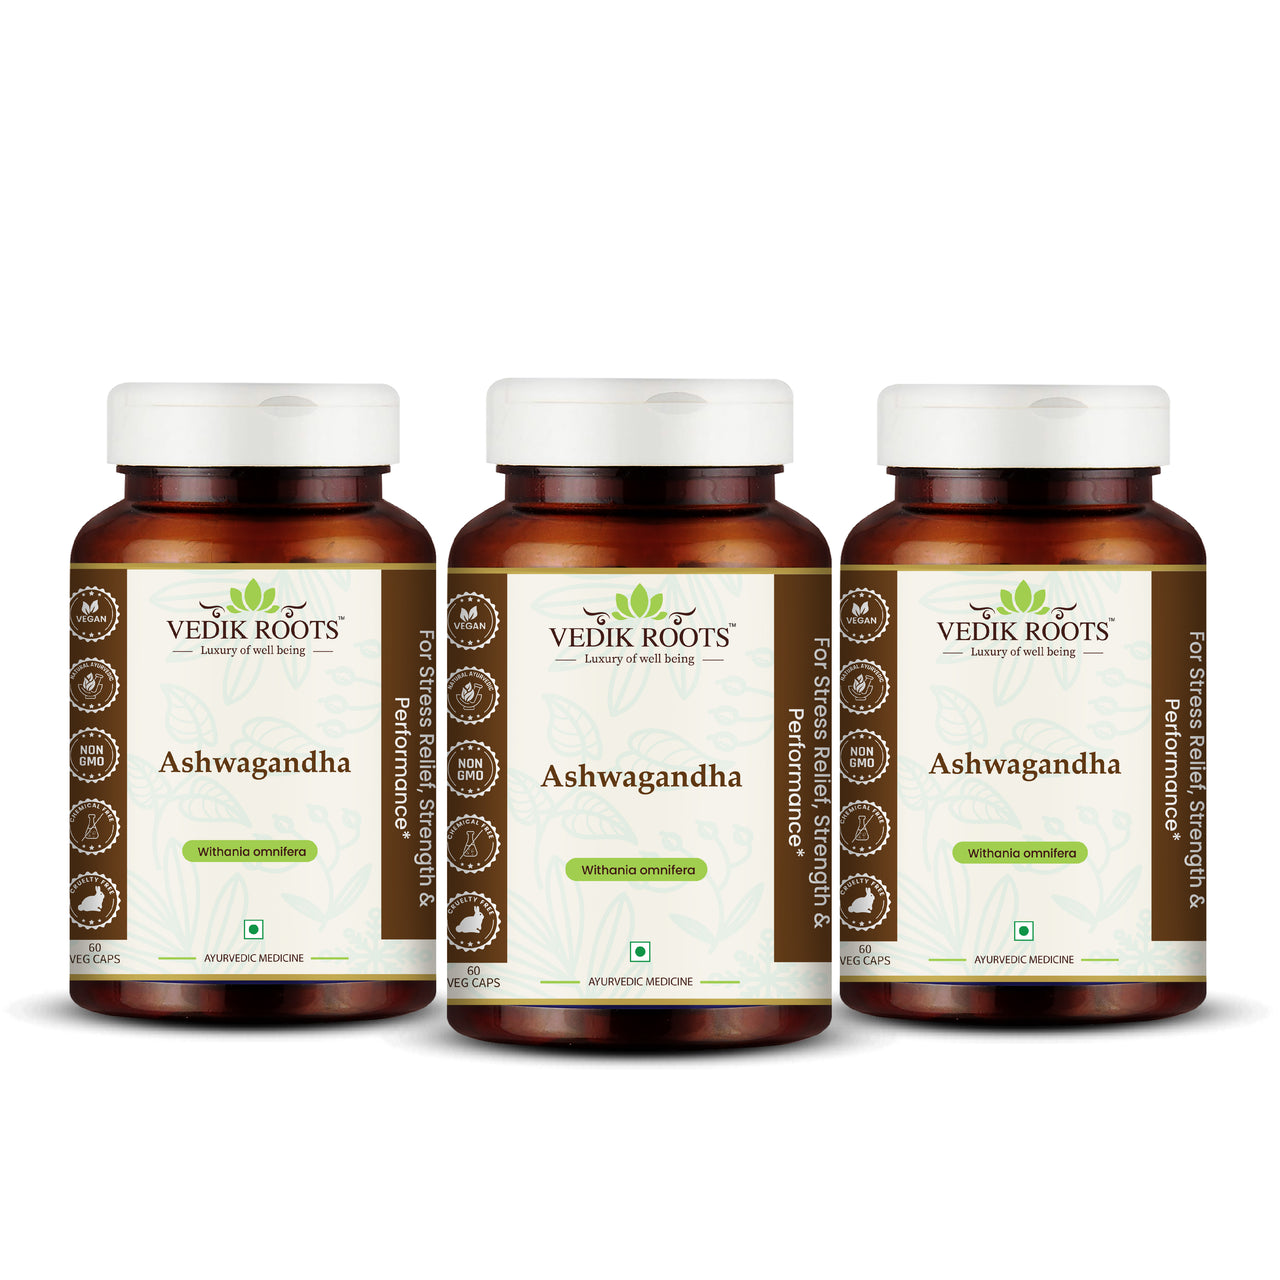 Ashwagandha Capsules: Natural Supplement for Strength, Performance, and Stress.